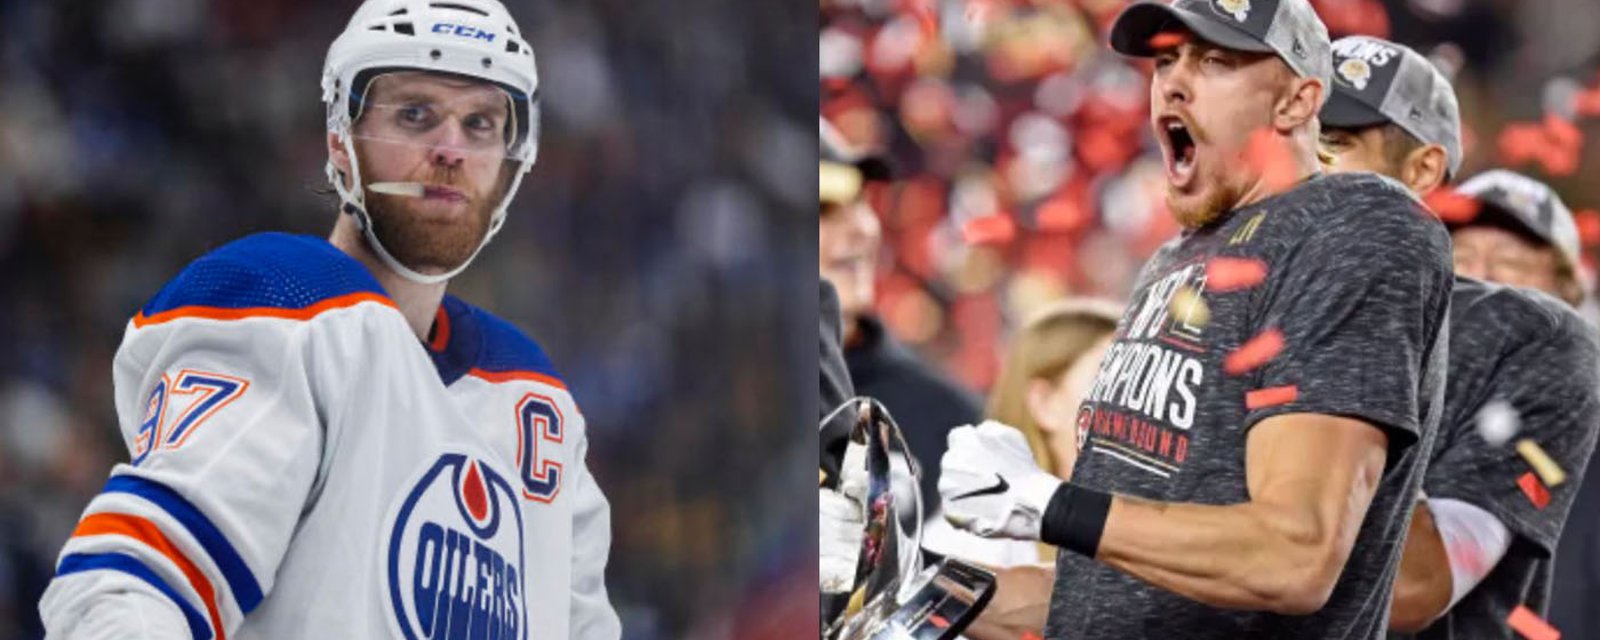 NFL Pro Bowl tight end defends Connor McDavid 